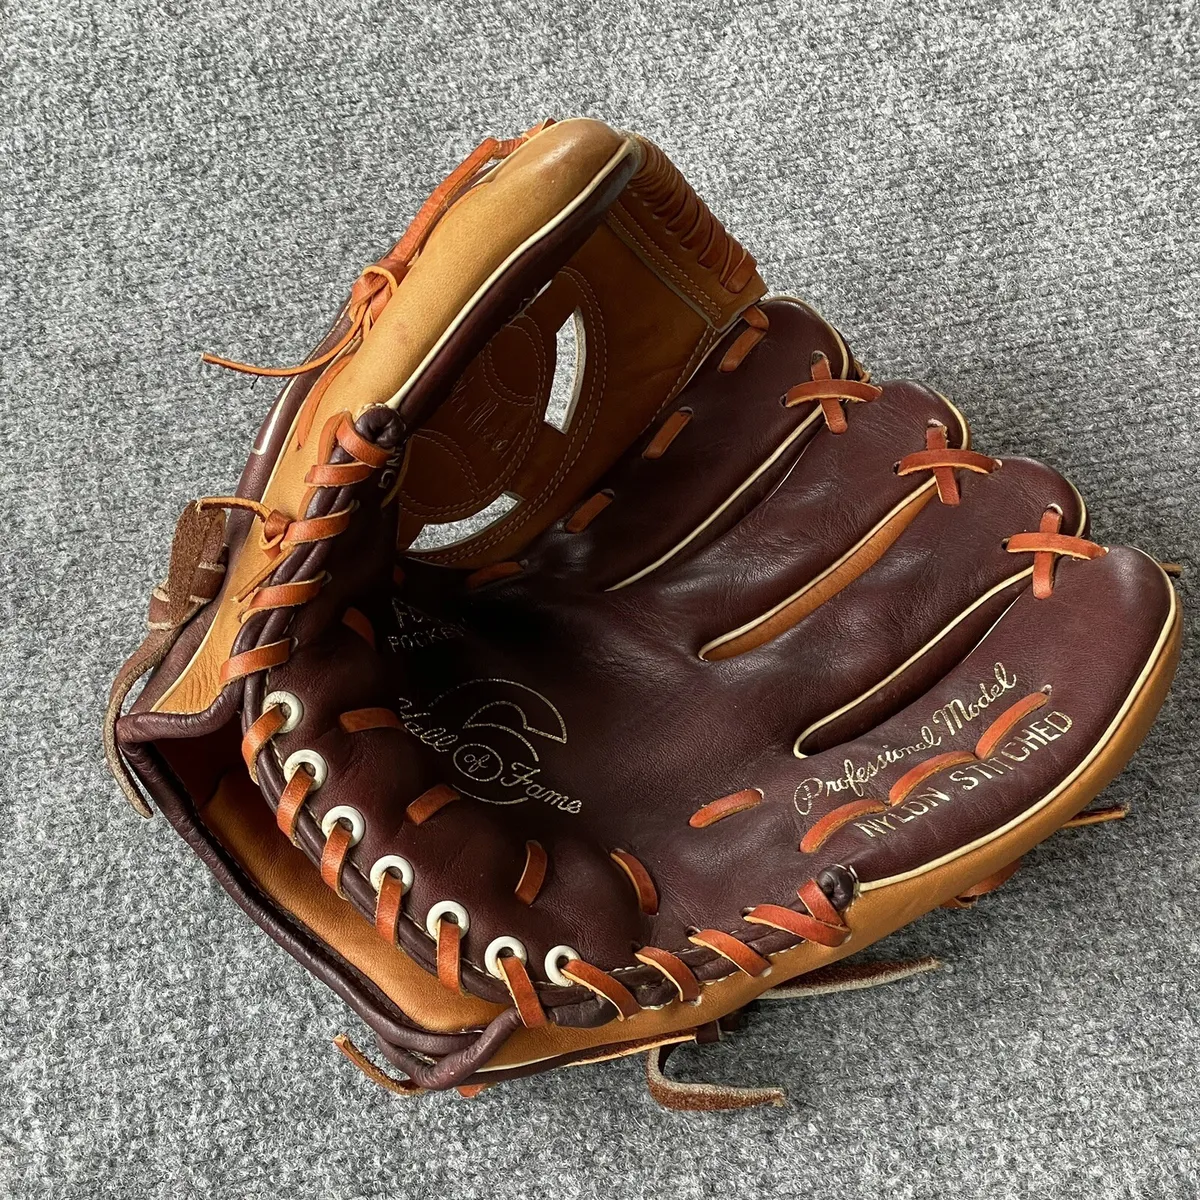 how to restring a baseball glove